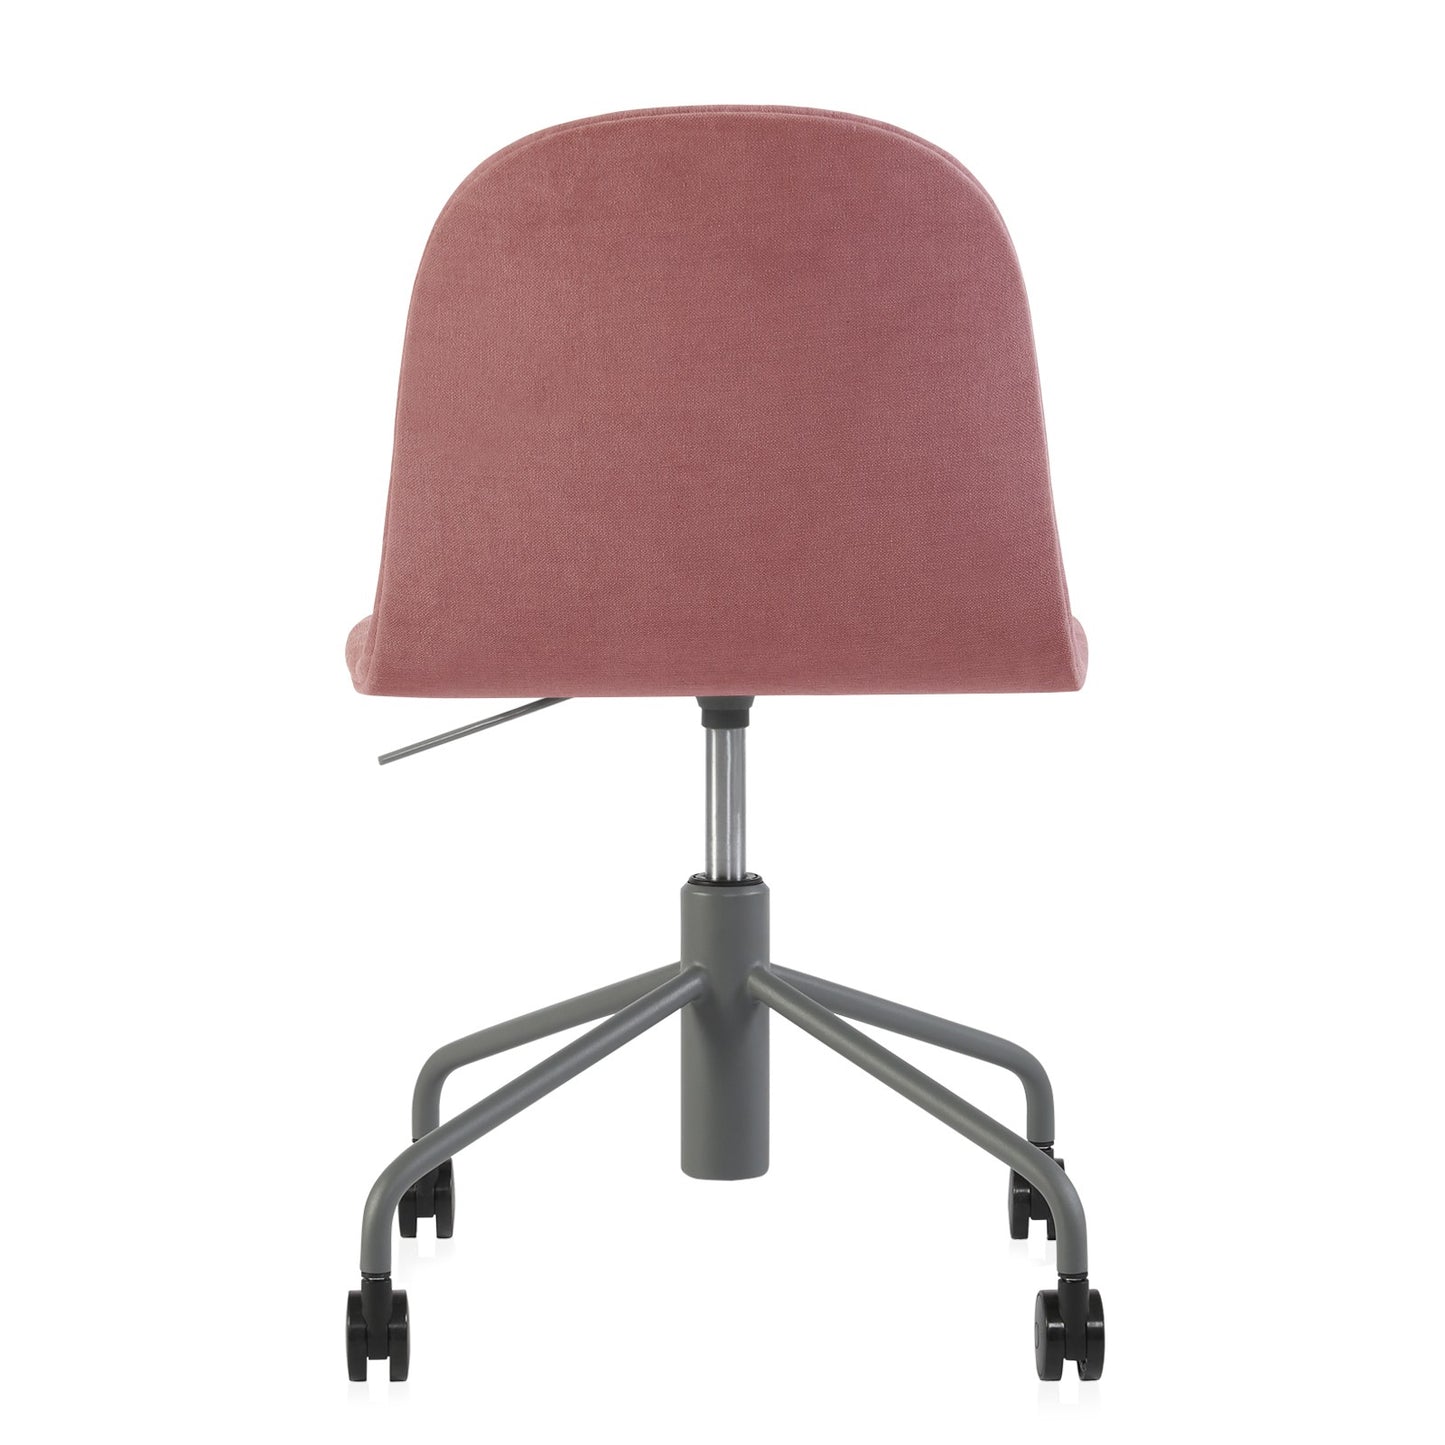 Chair Mannequin 06 - Dusty Rose